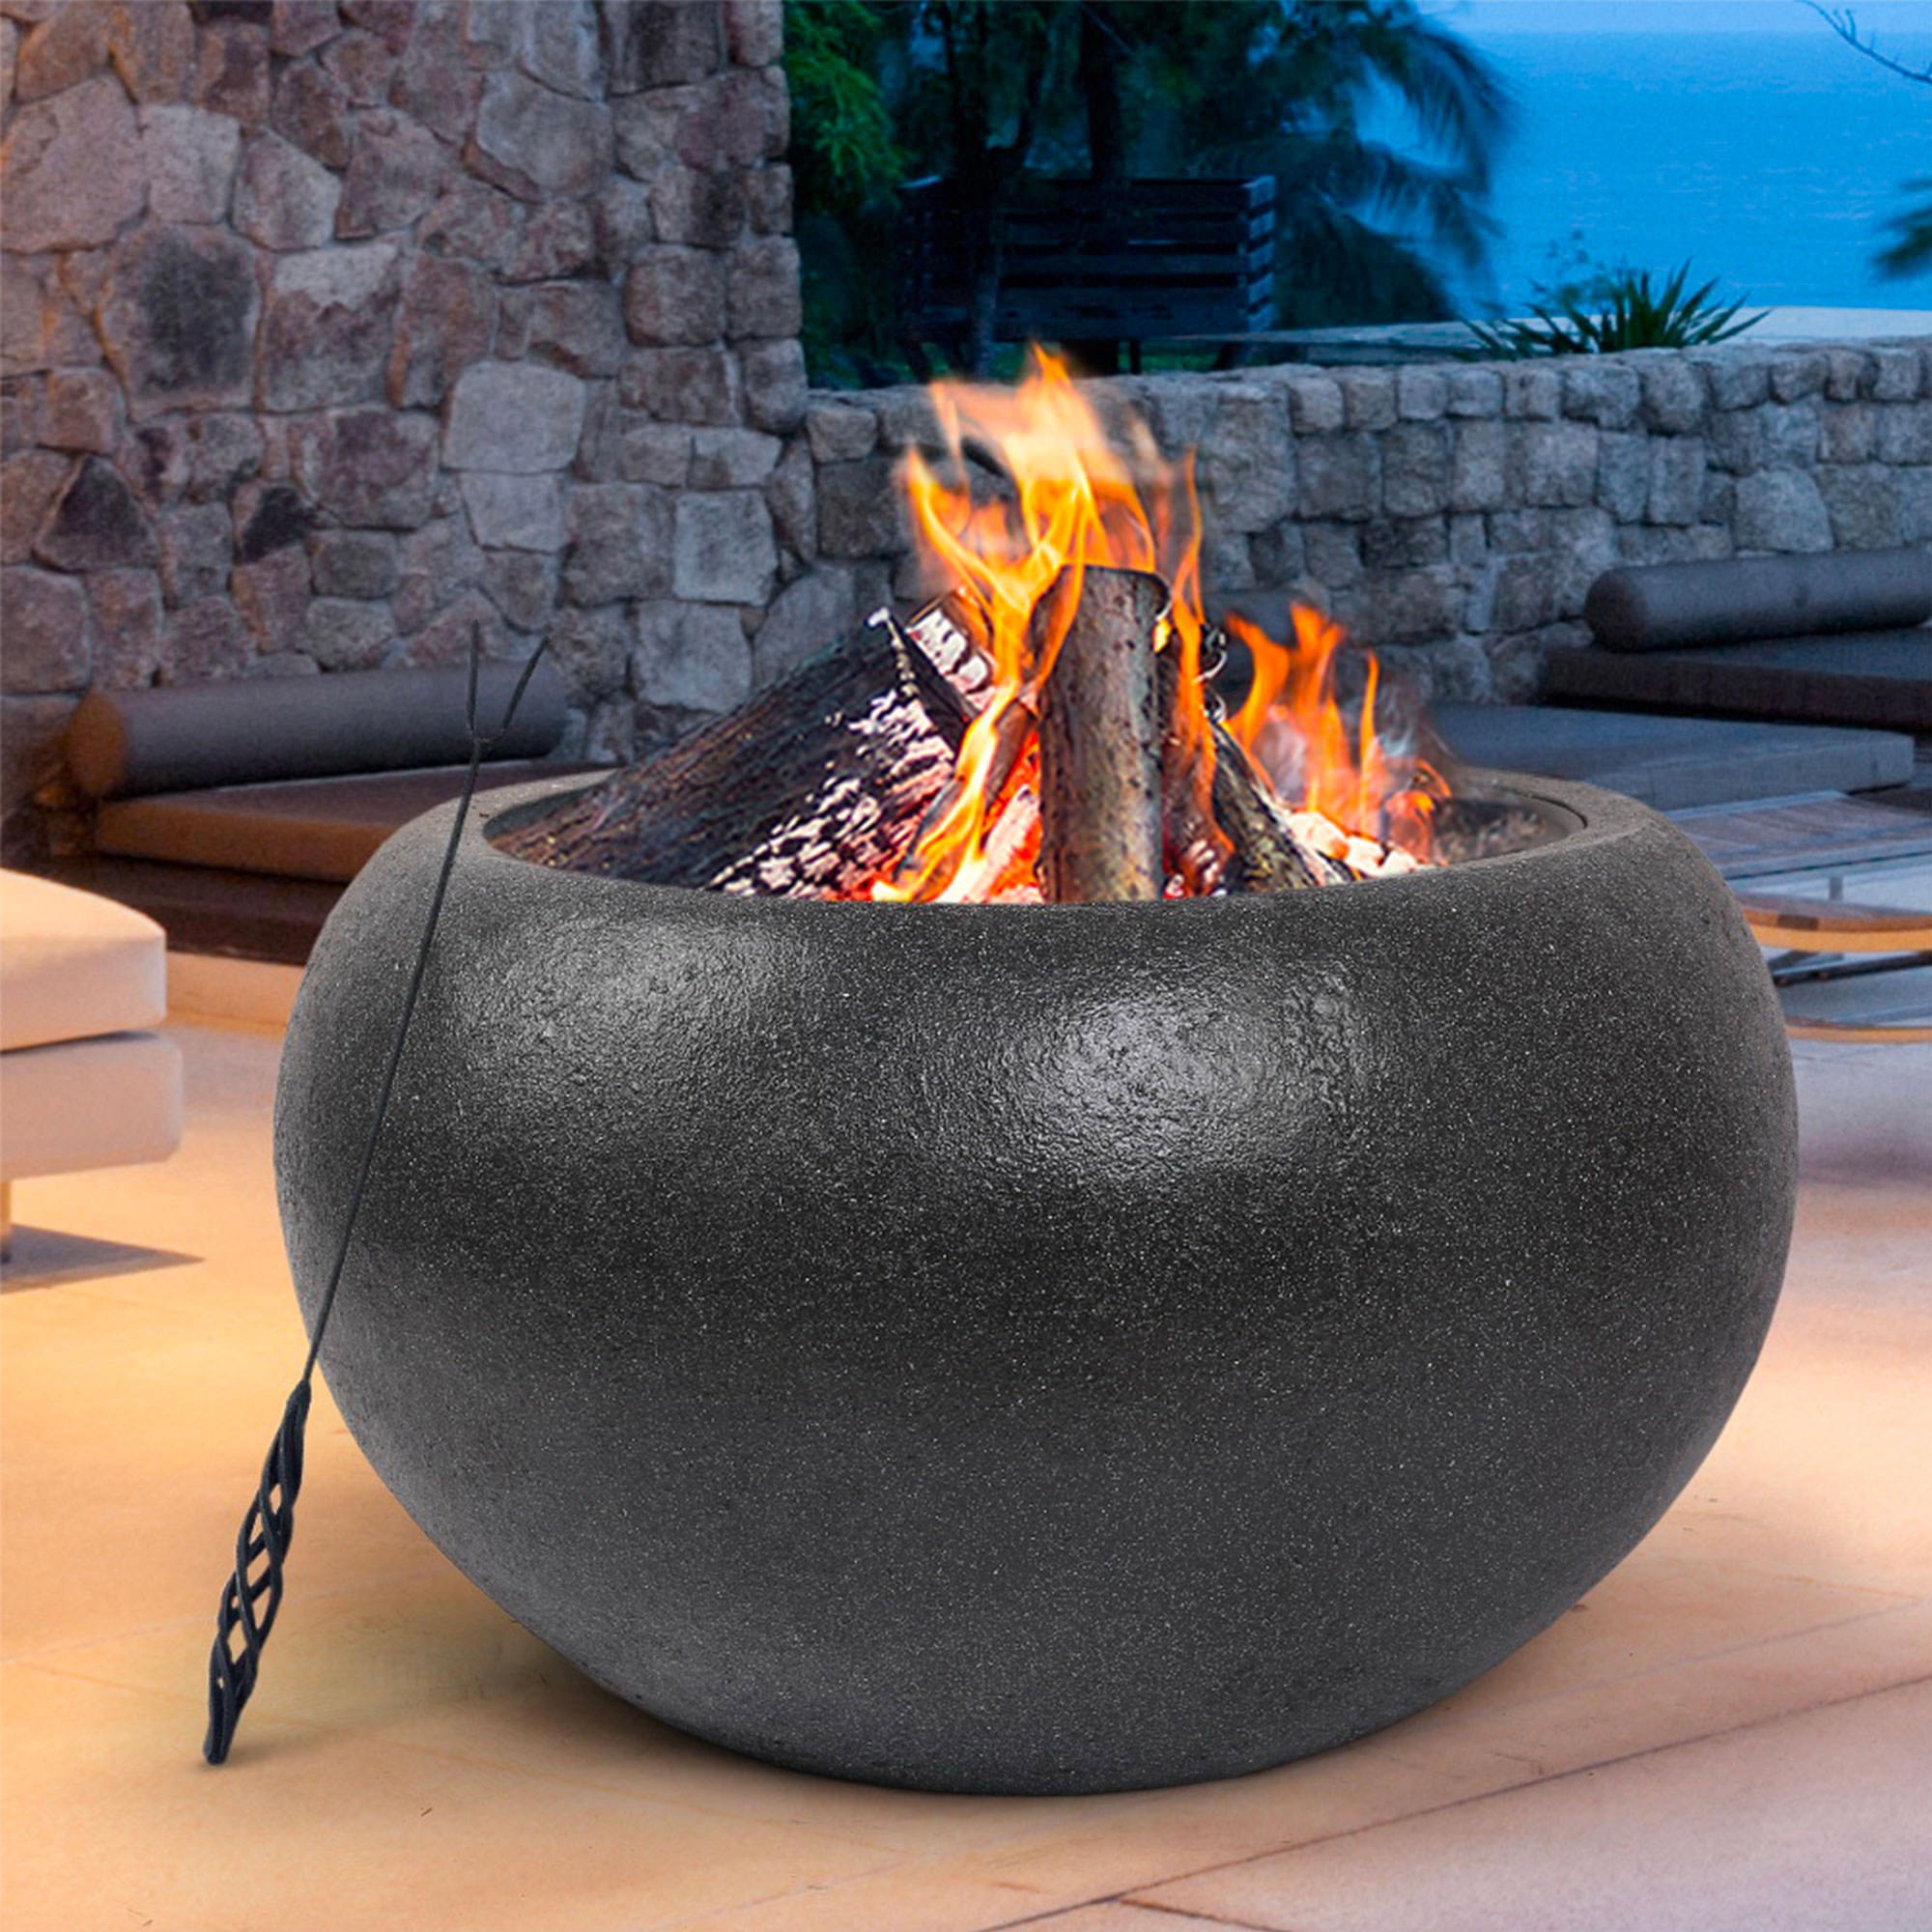 Grillz Oval Outdoor Fire Pit with Mesh Cover and Poker 61cm Image 2